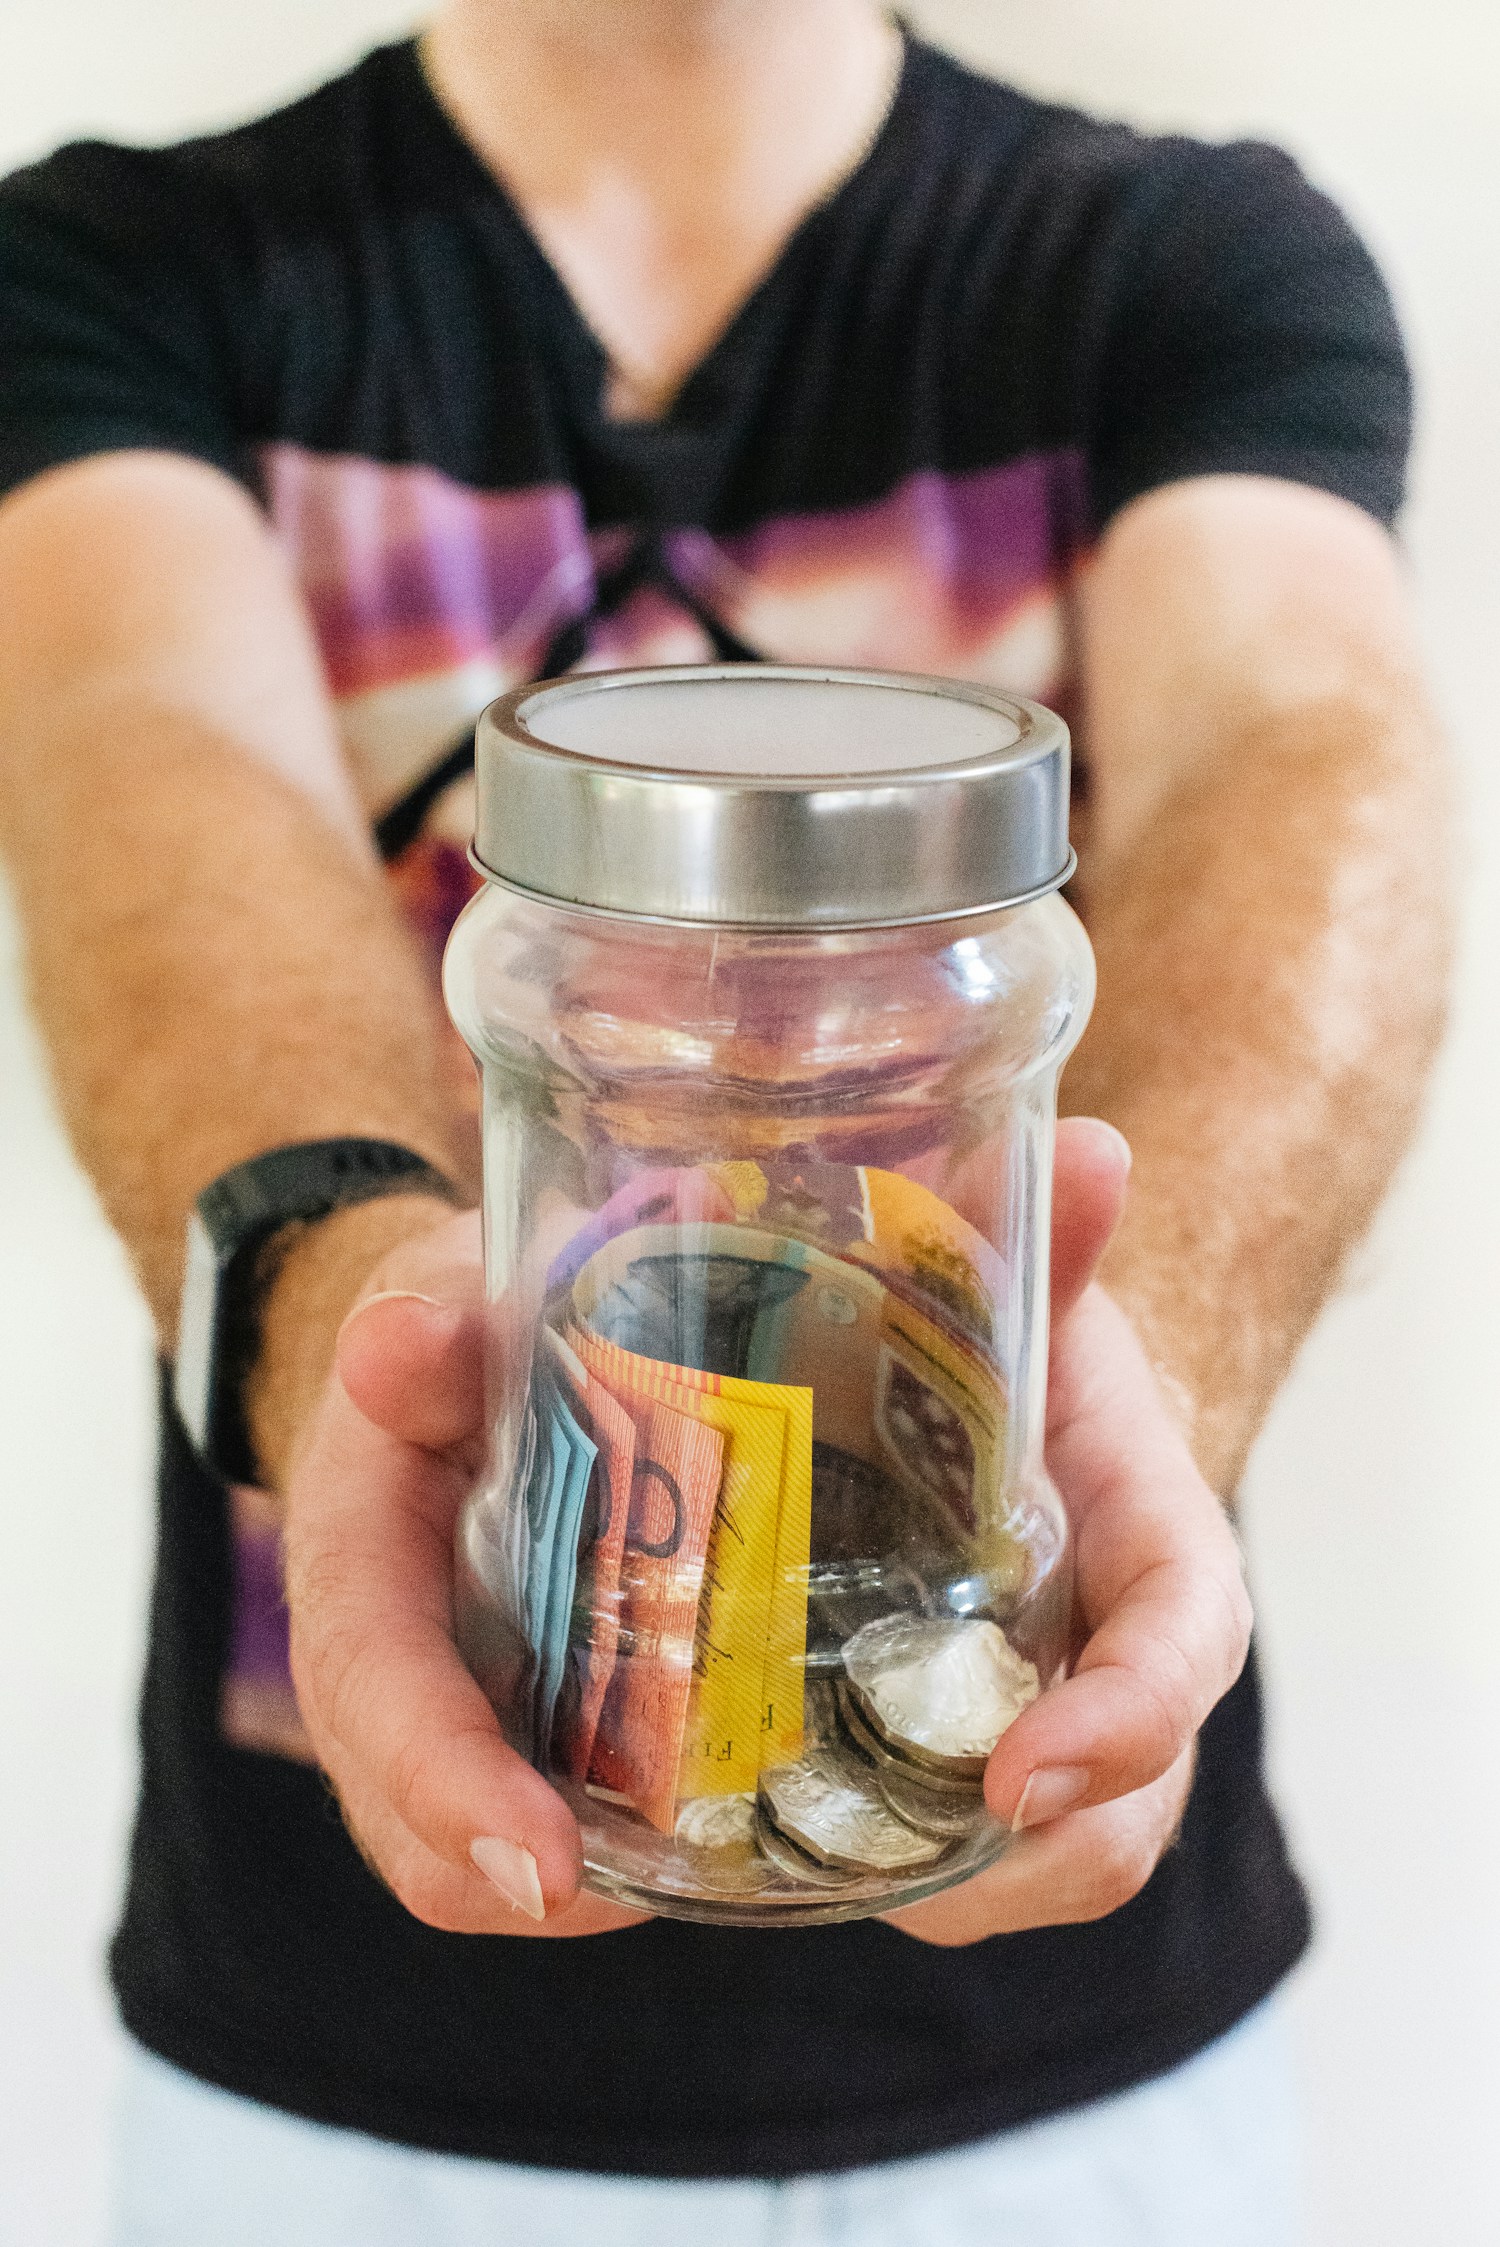 Person holding a jar containing cash and coins.